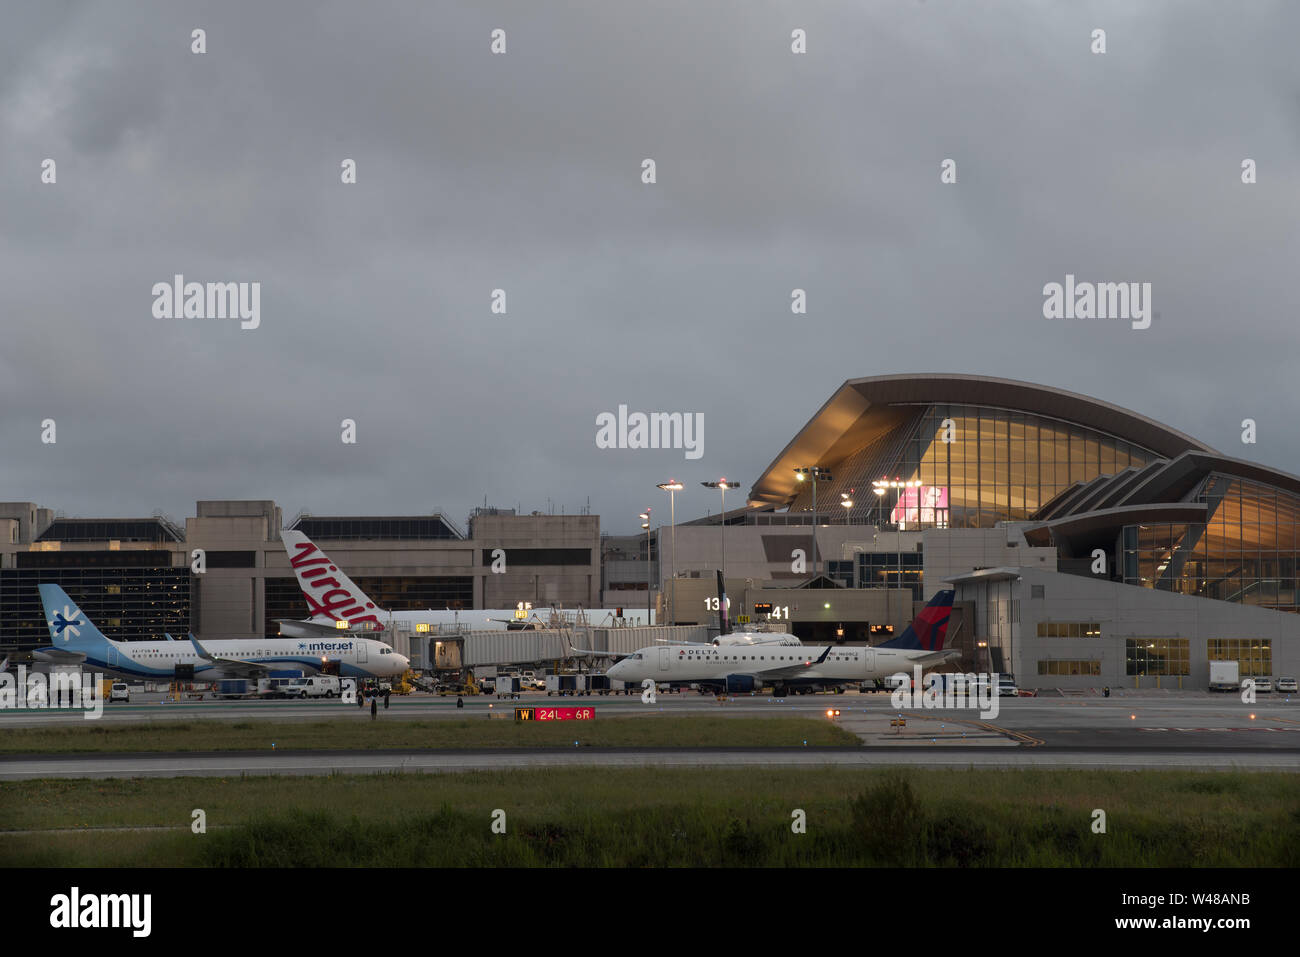 Image showing the Tom Bradley terminal at the Los Angeles International Airport, LAX. Stock Photo